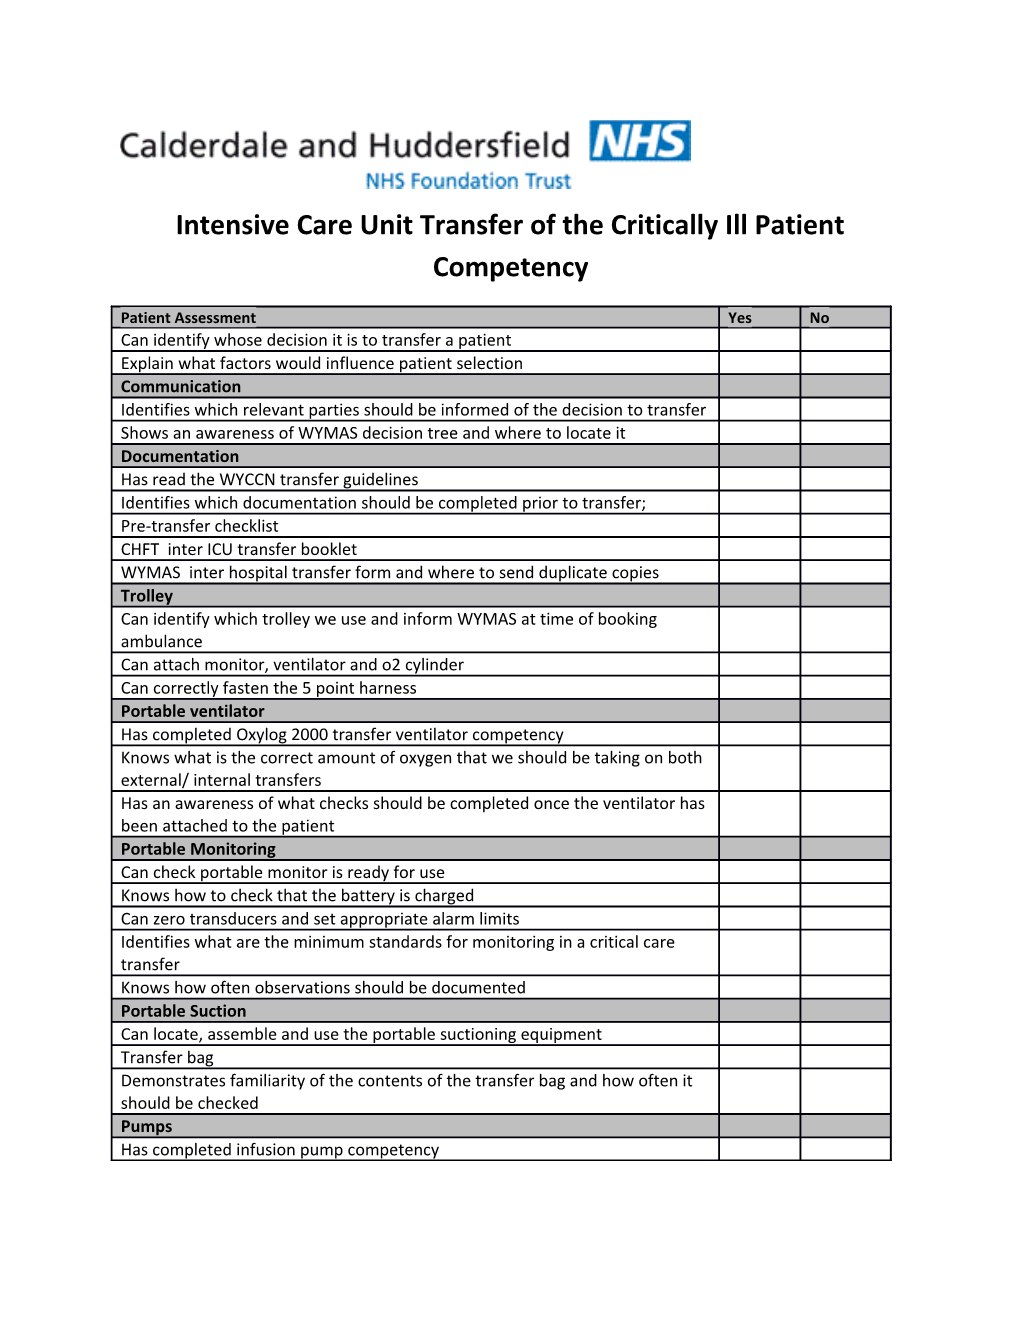 Intensive Care Unit Transfer of the Critically Ill Patient Competency